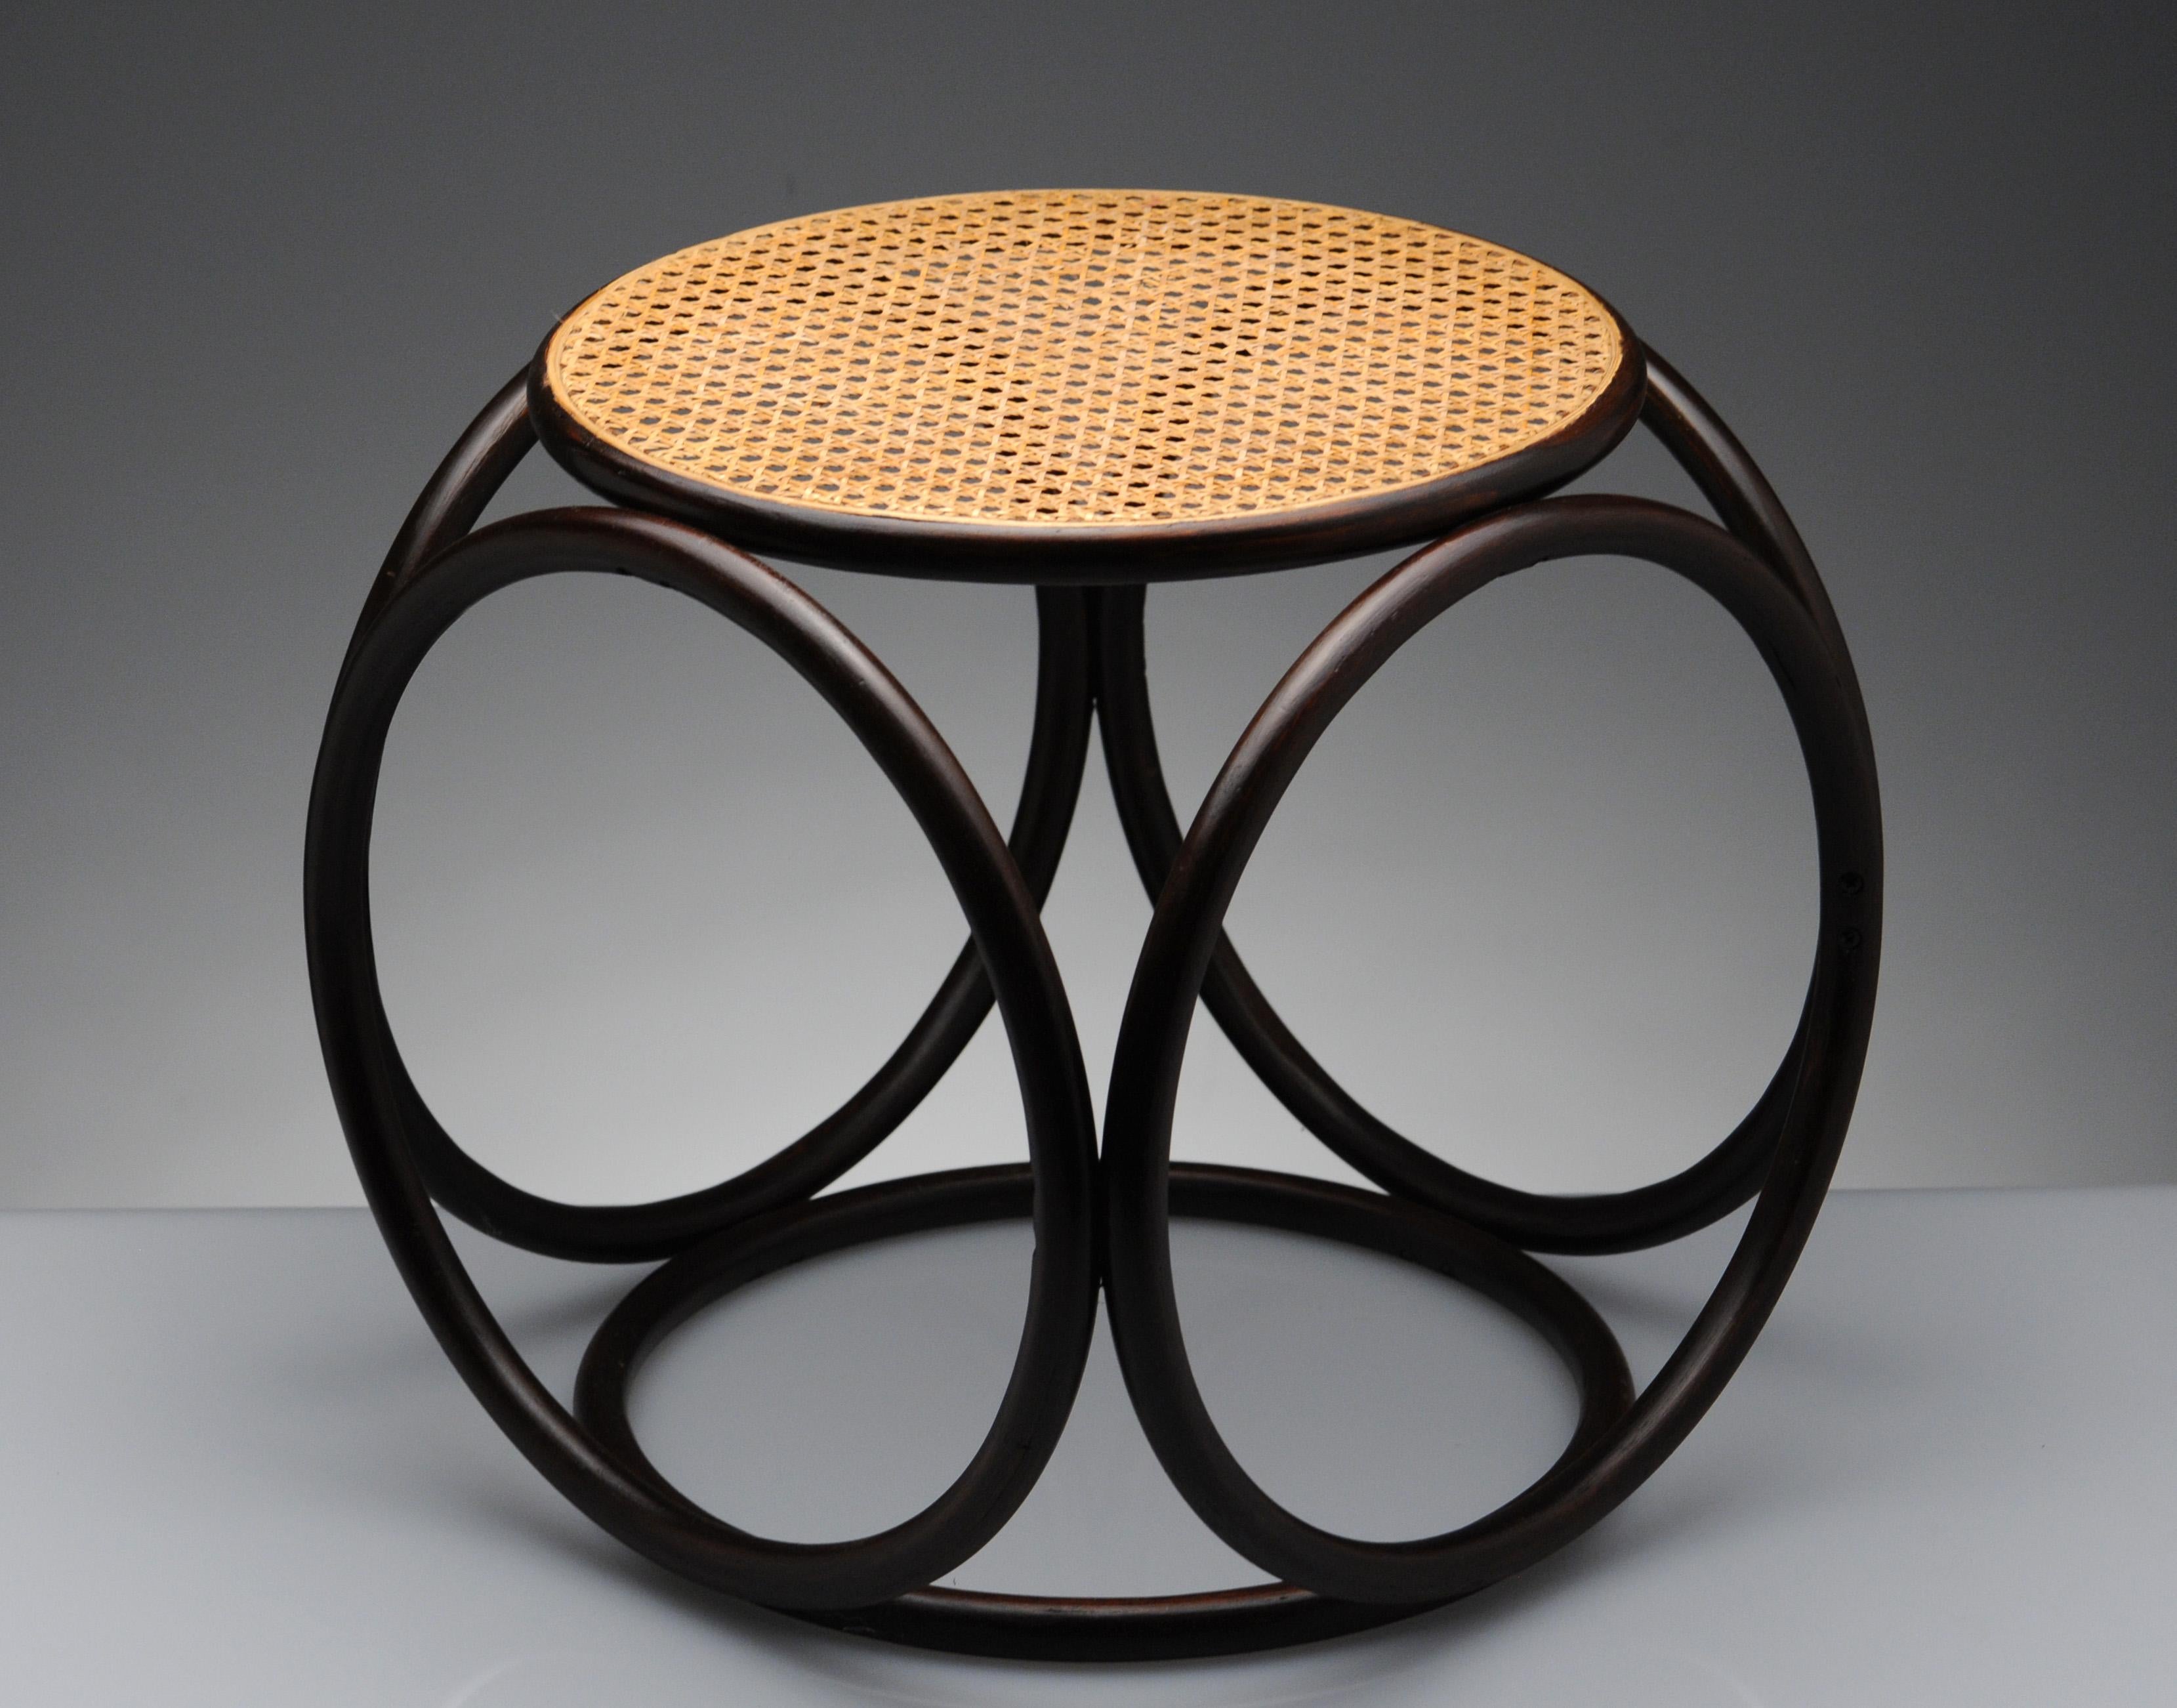 Appealing circular designed stool by Thonet. Sculptural and versatile design, can be used as a side table or ottoman as well.